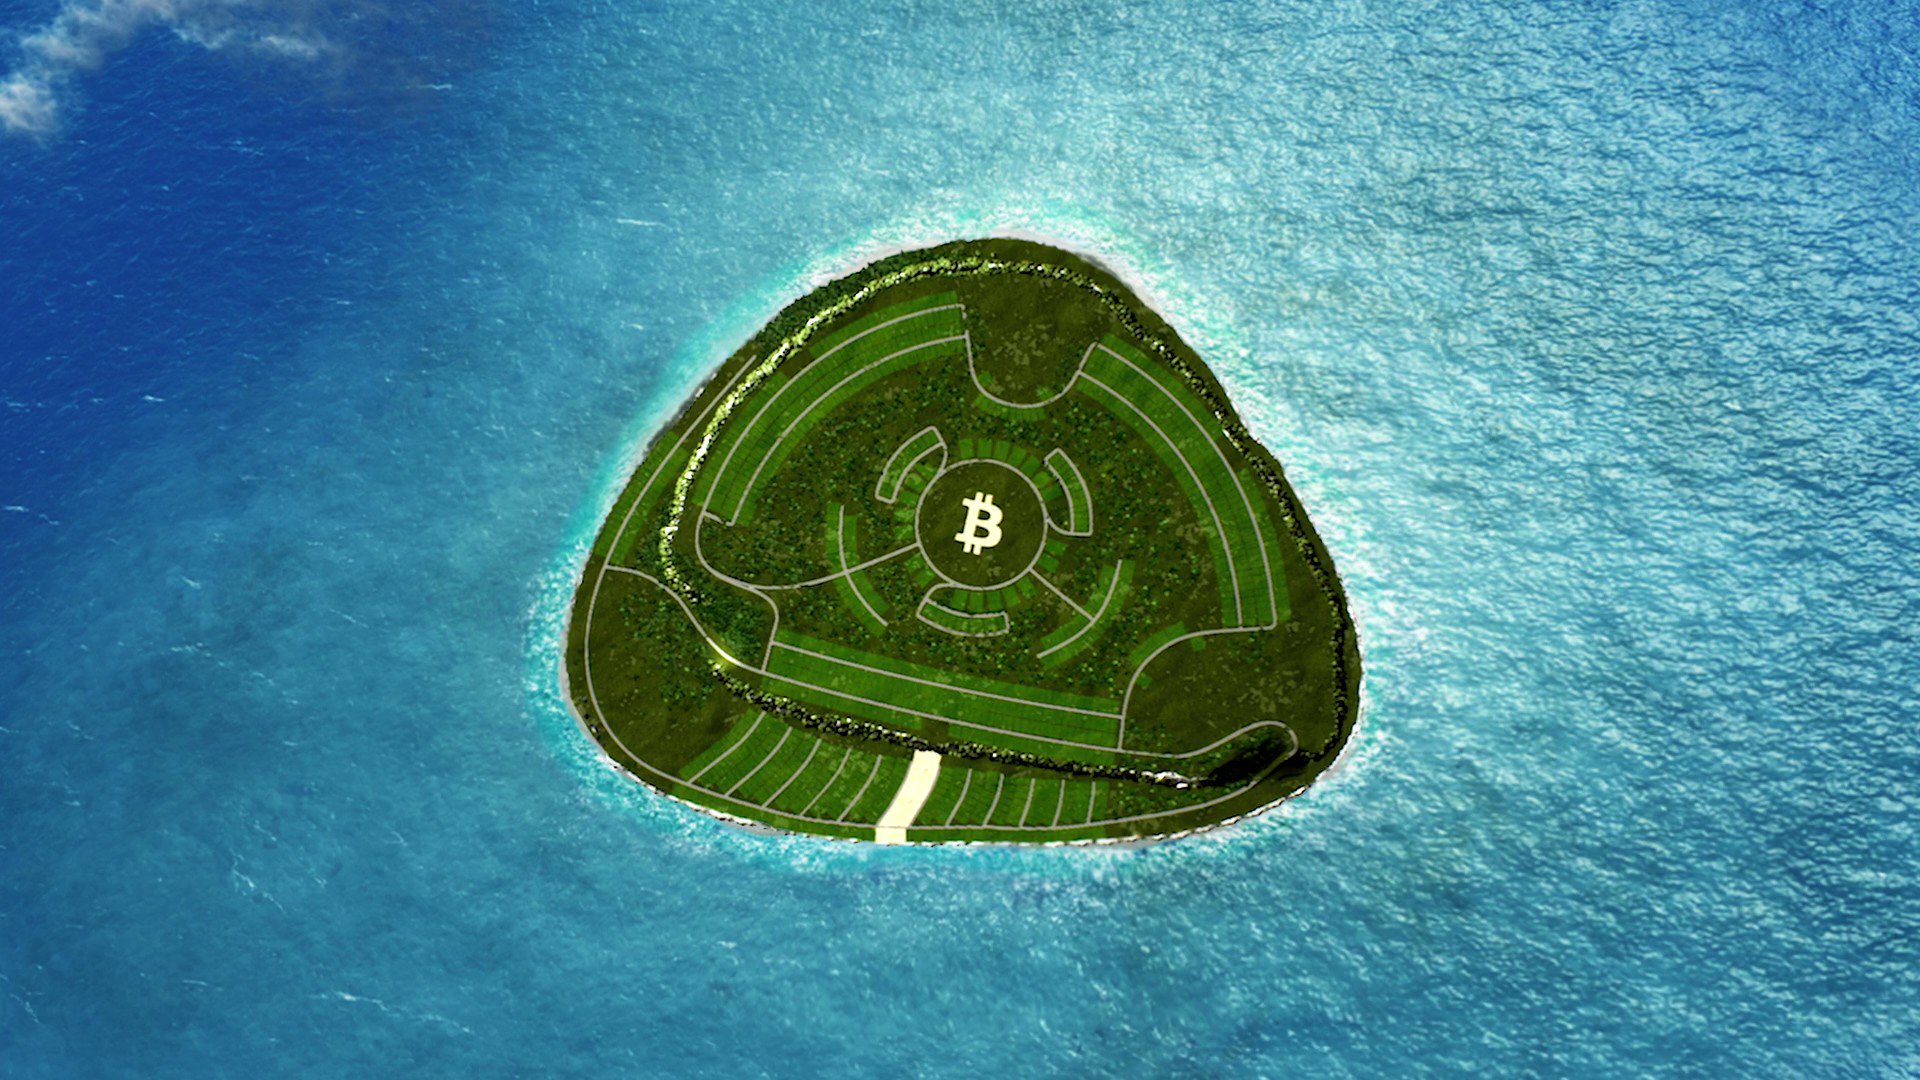 Satoshi Island on Twitter: "The blocks of land on Satoshi Island are divided into 2,100 uniquely indentifiable parcels, made up of 10 NFTs per block. The NFTs are available through 7 collections